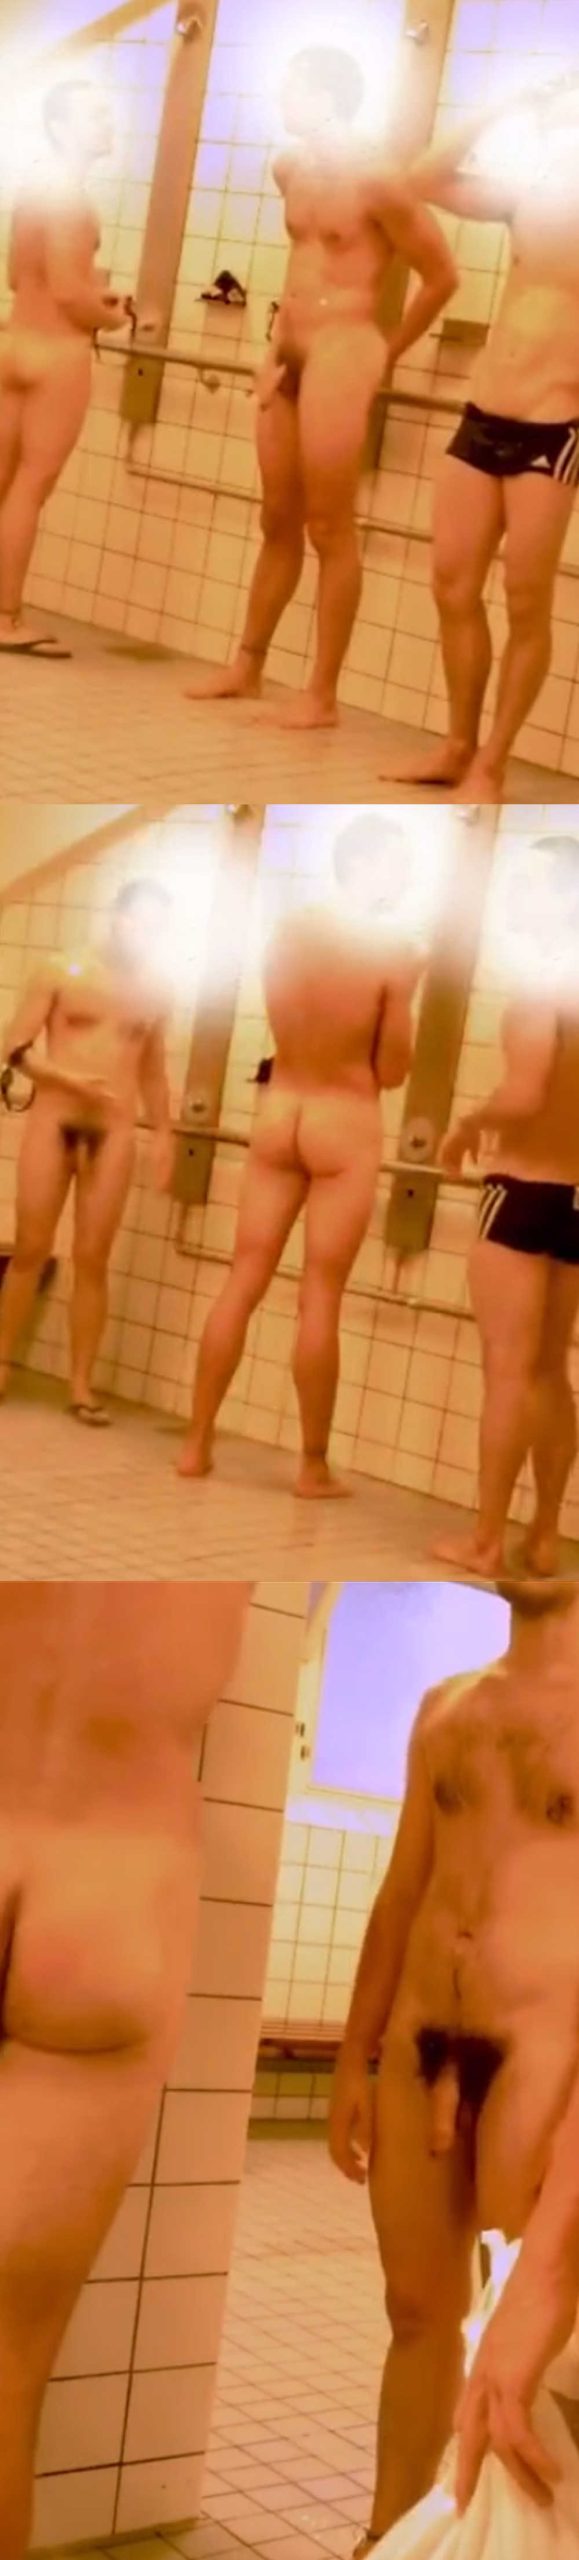 hung guys caught by hidden cam in communal shower